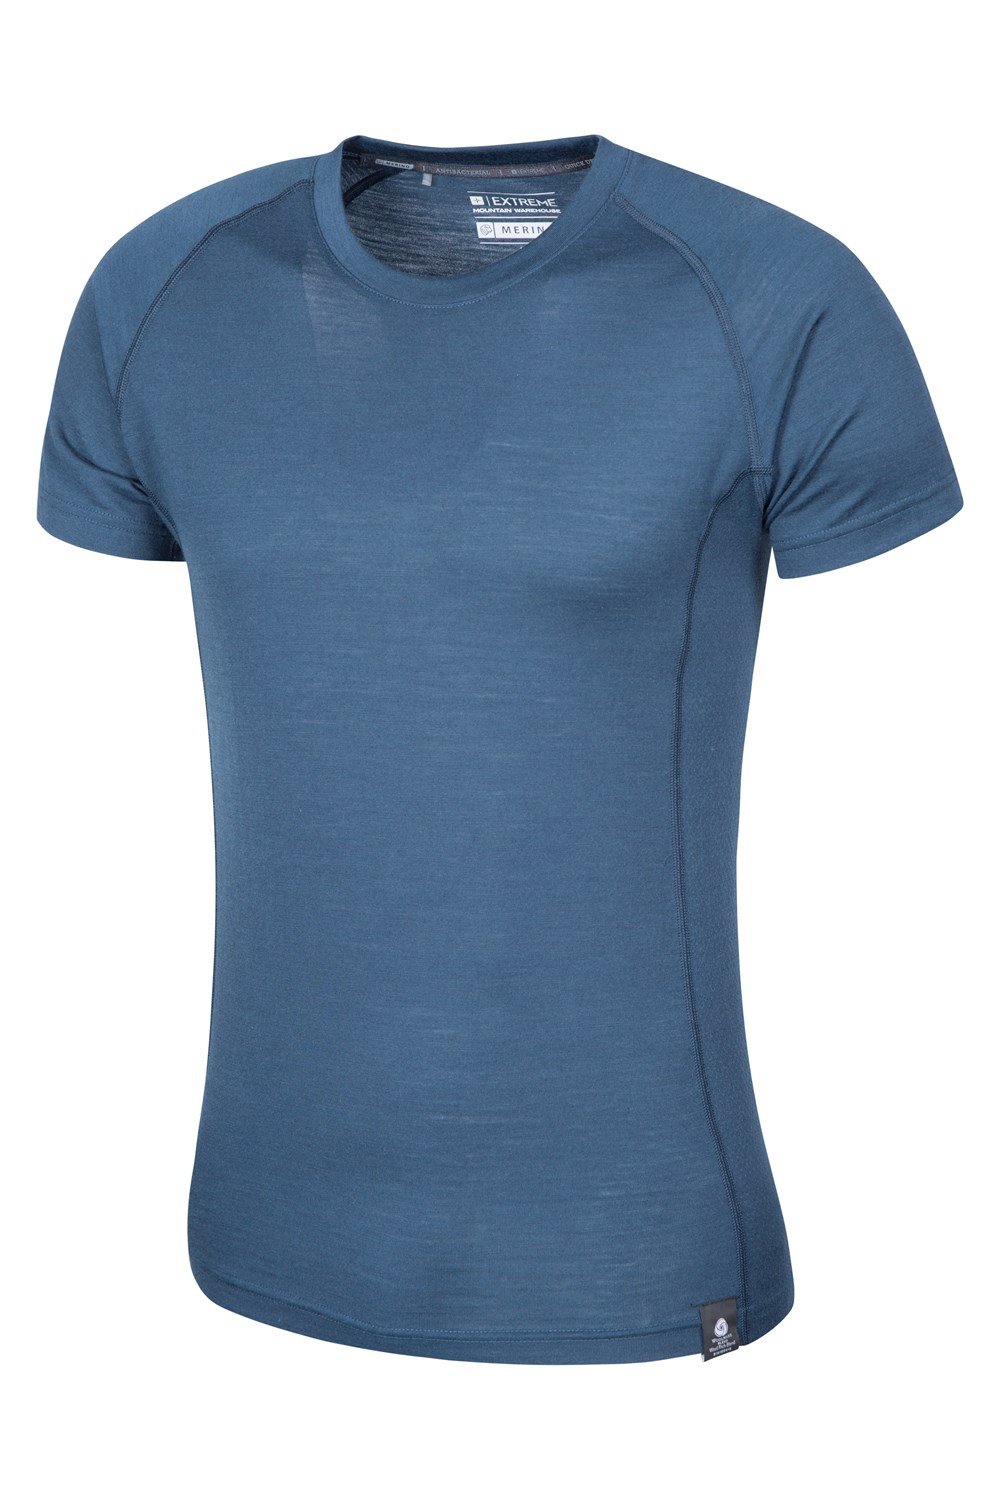 Mountain Warehouse Mens Breathable Tshirt with Merino Wool and Polyester Blend